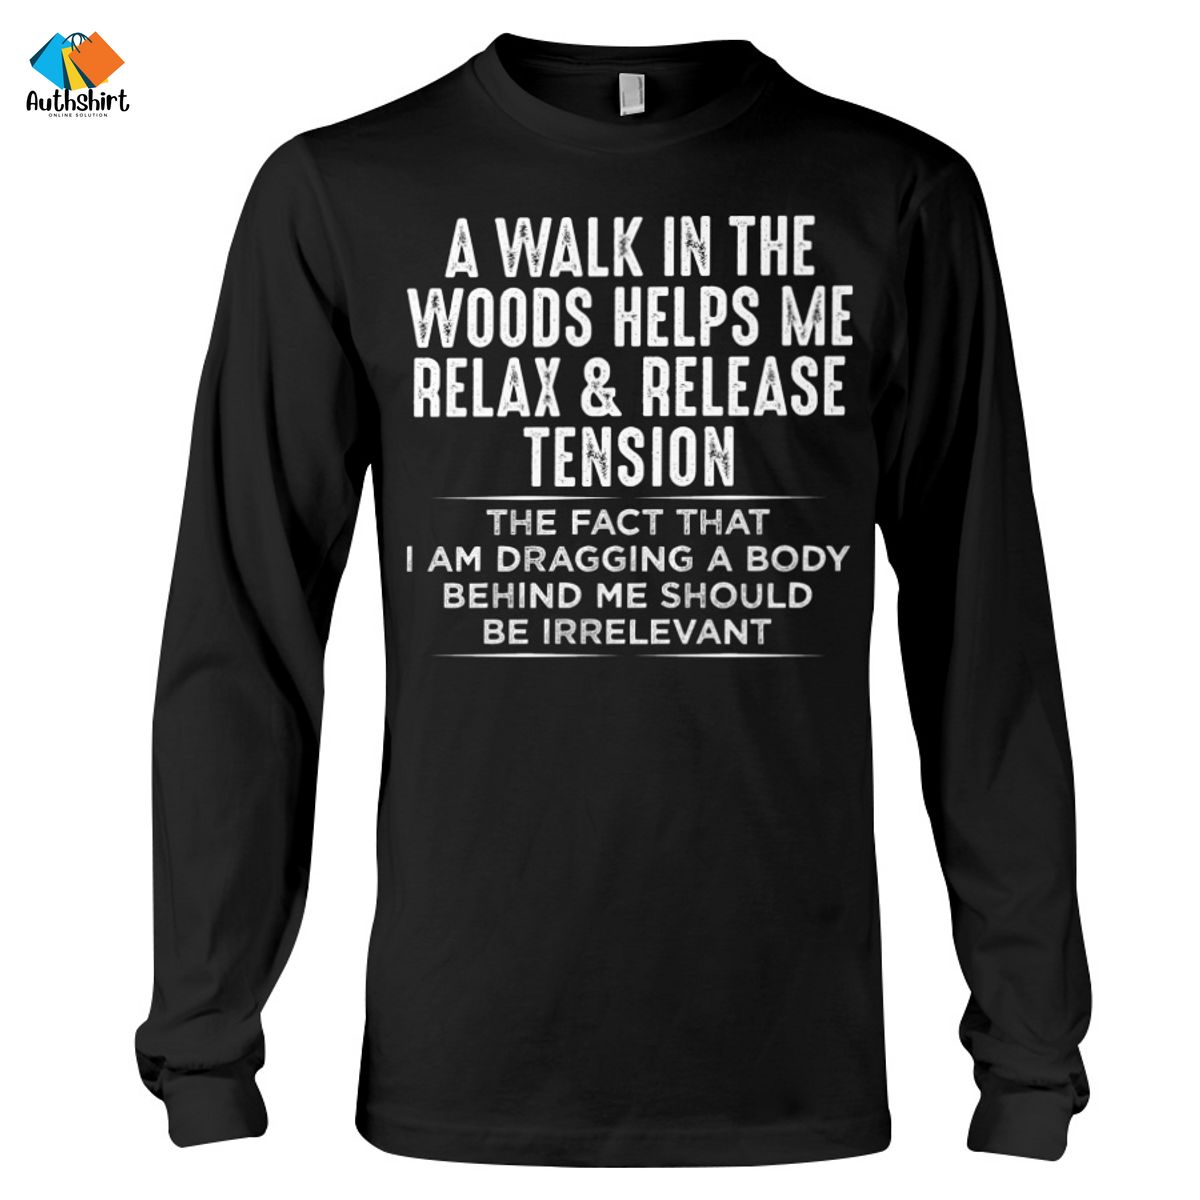 A Walk In The Woods Helps Me Relax And Release Tension Shirt